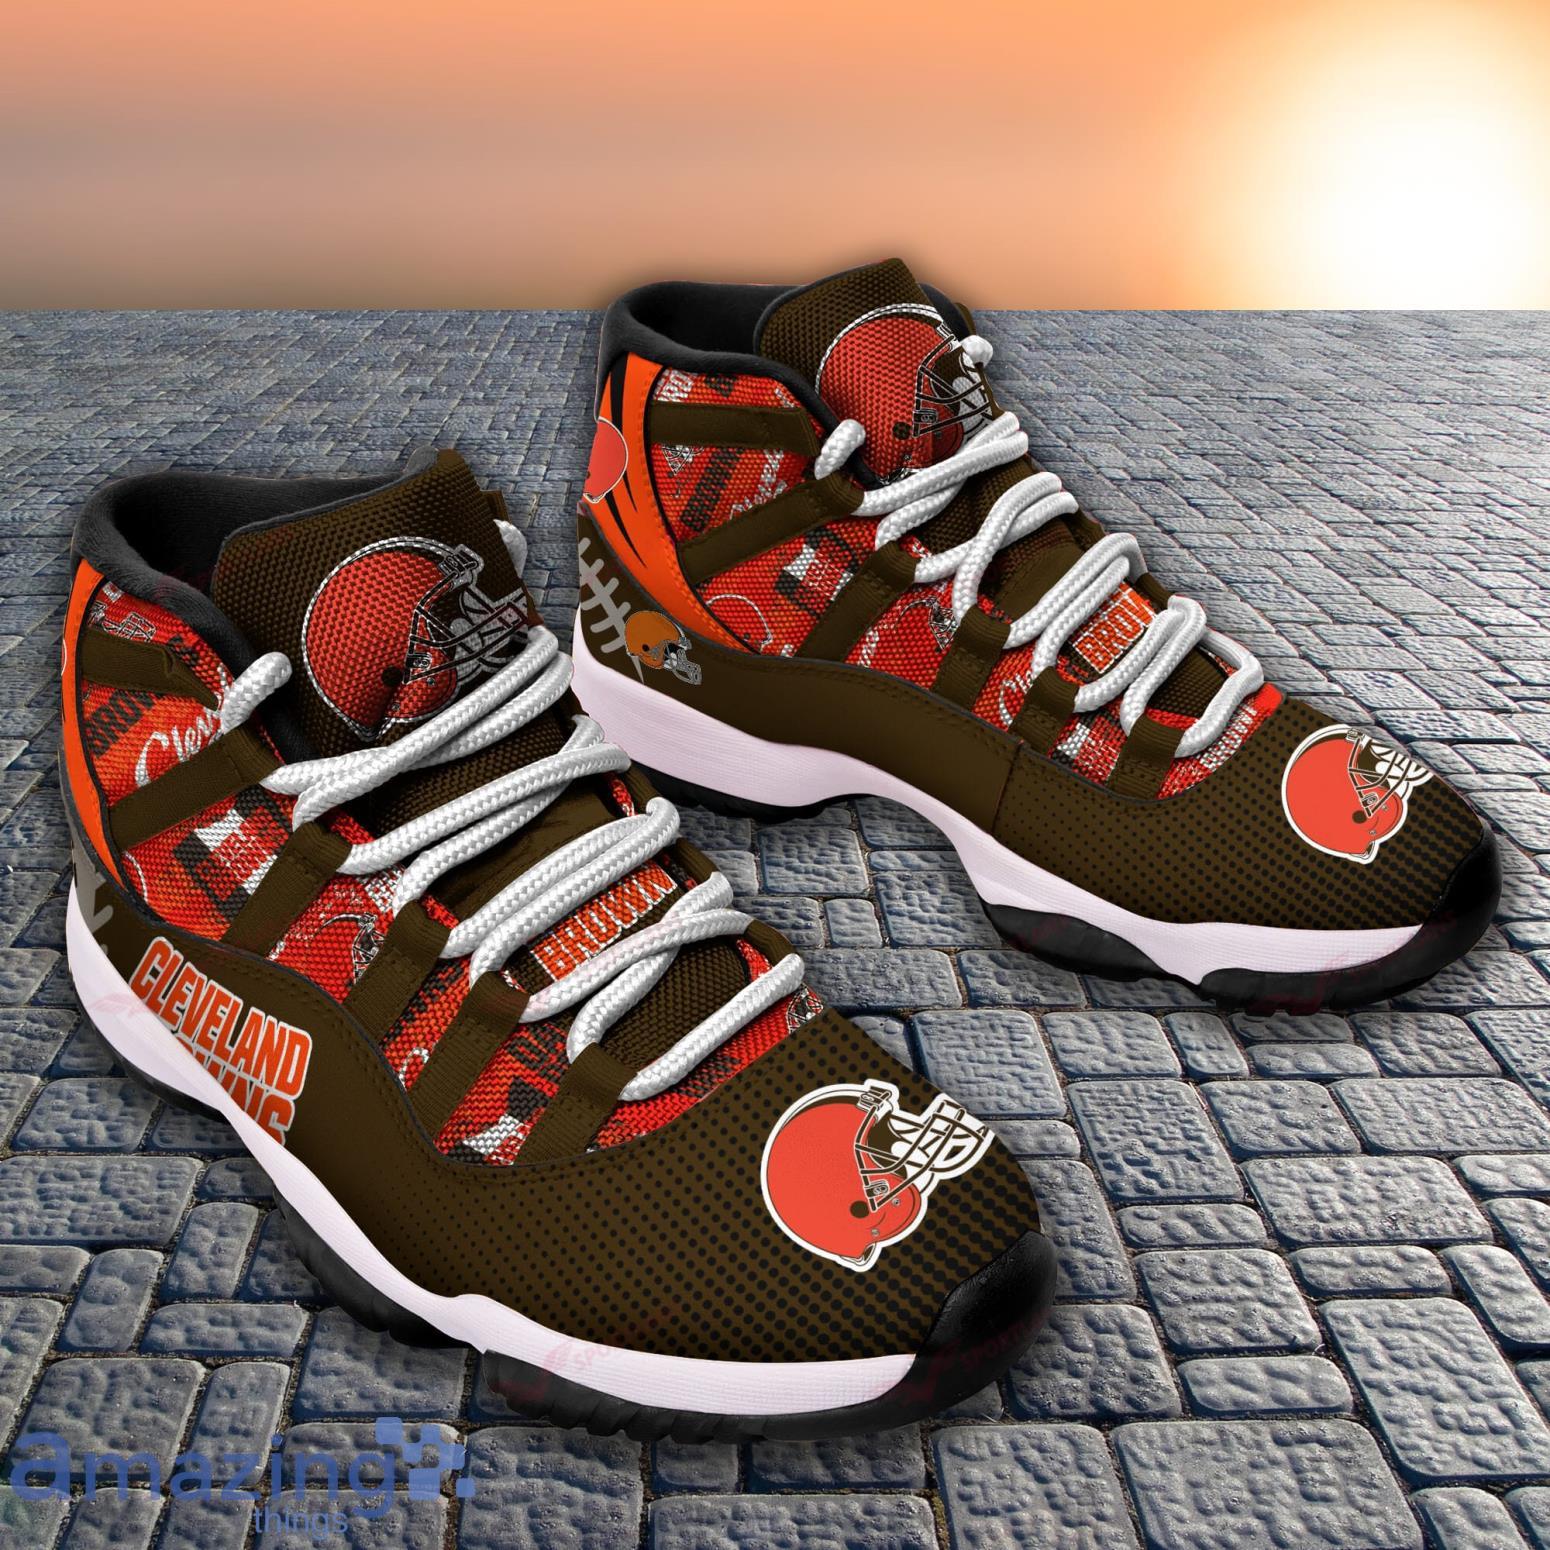 Cleveland Browns NFL Air Jordan 11 Shoes Sport Running Shoes For